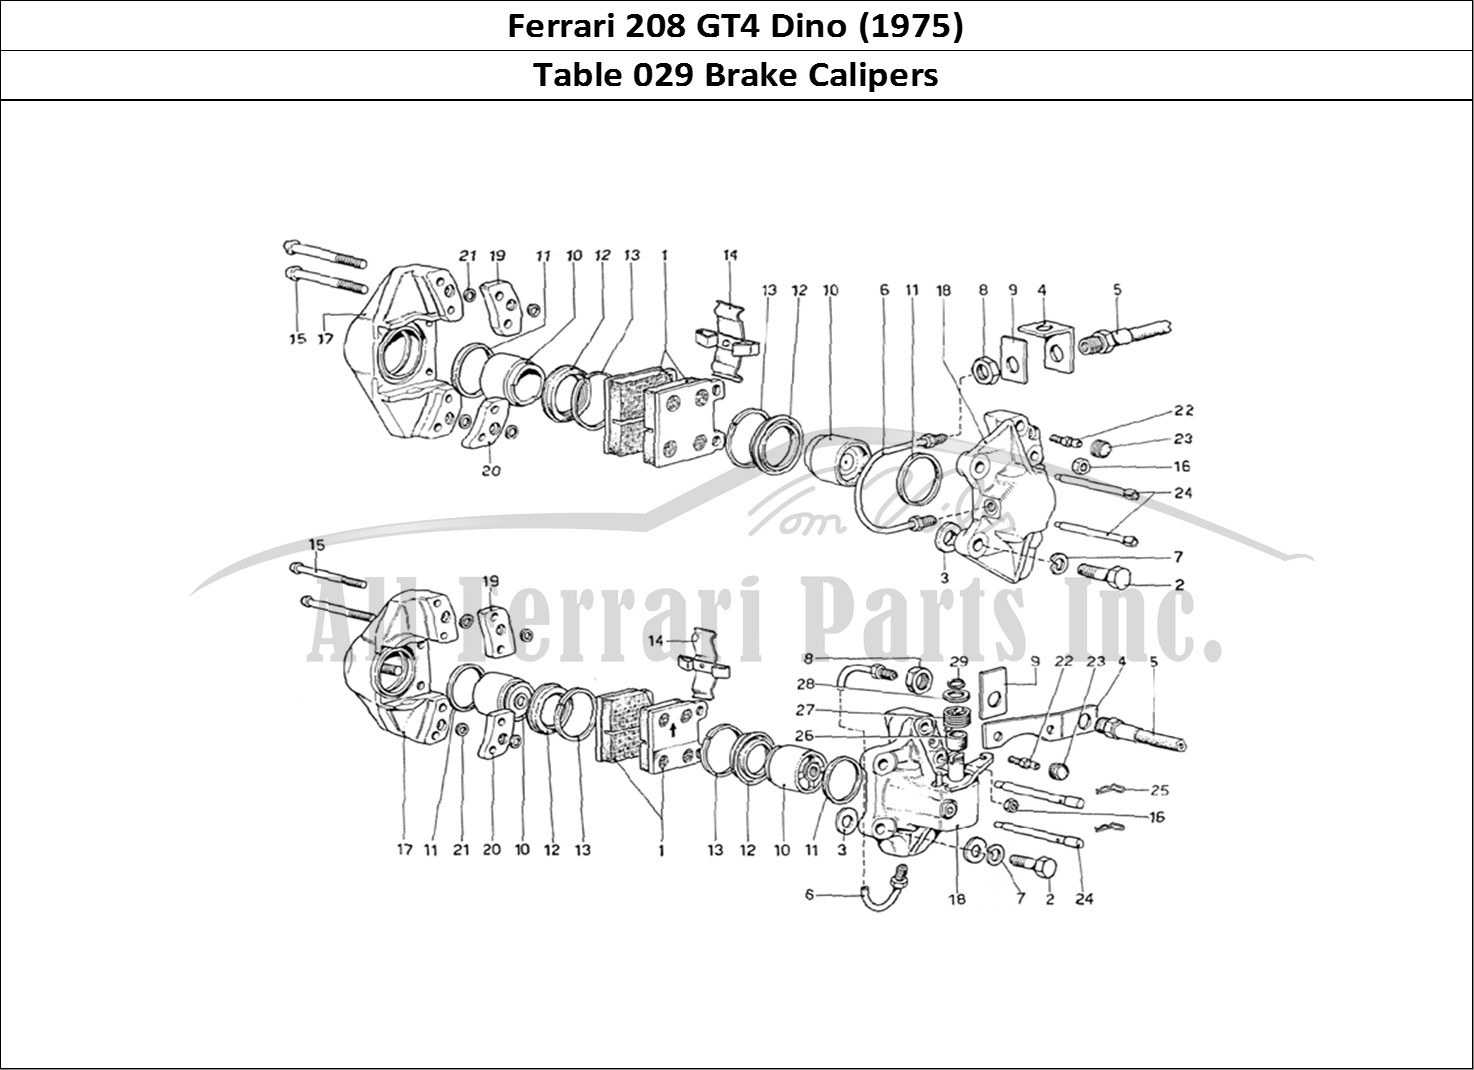 Ferrari Parts Ferrari 208 GT4 Dino (1975) Page 029 Calipers for Front and Re